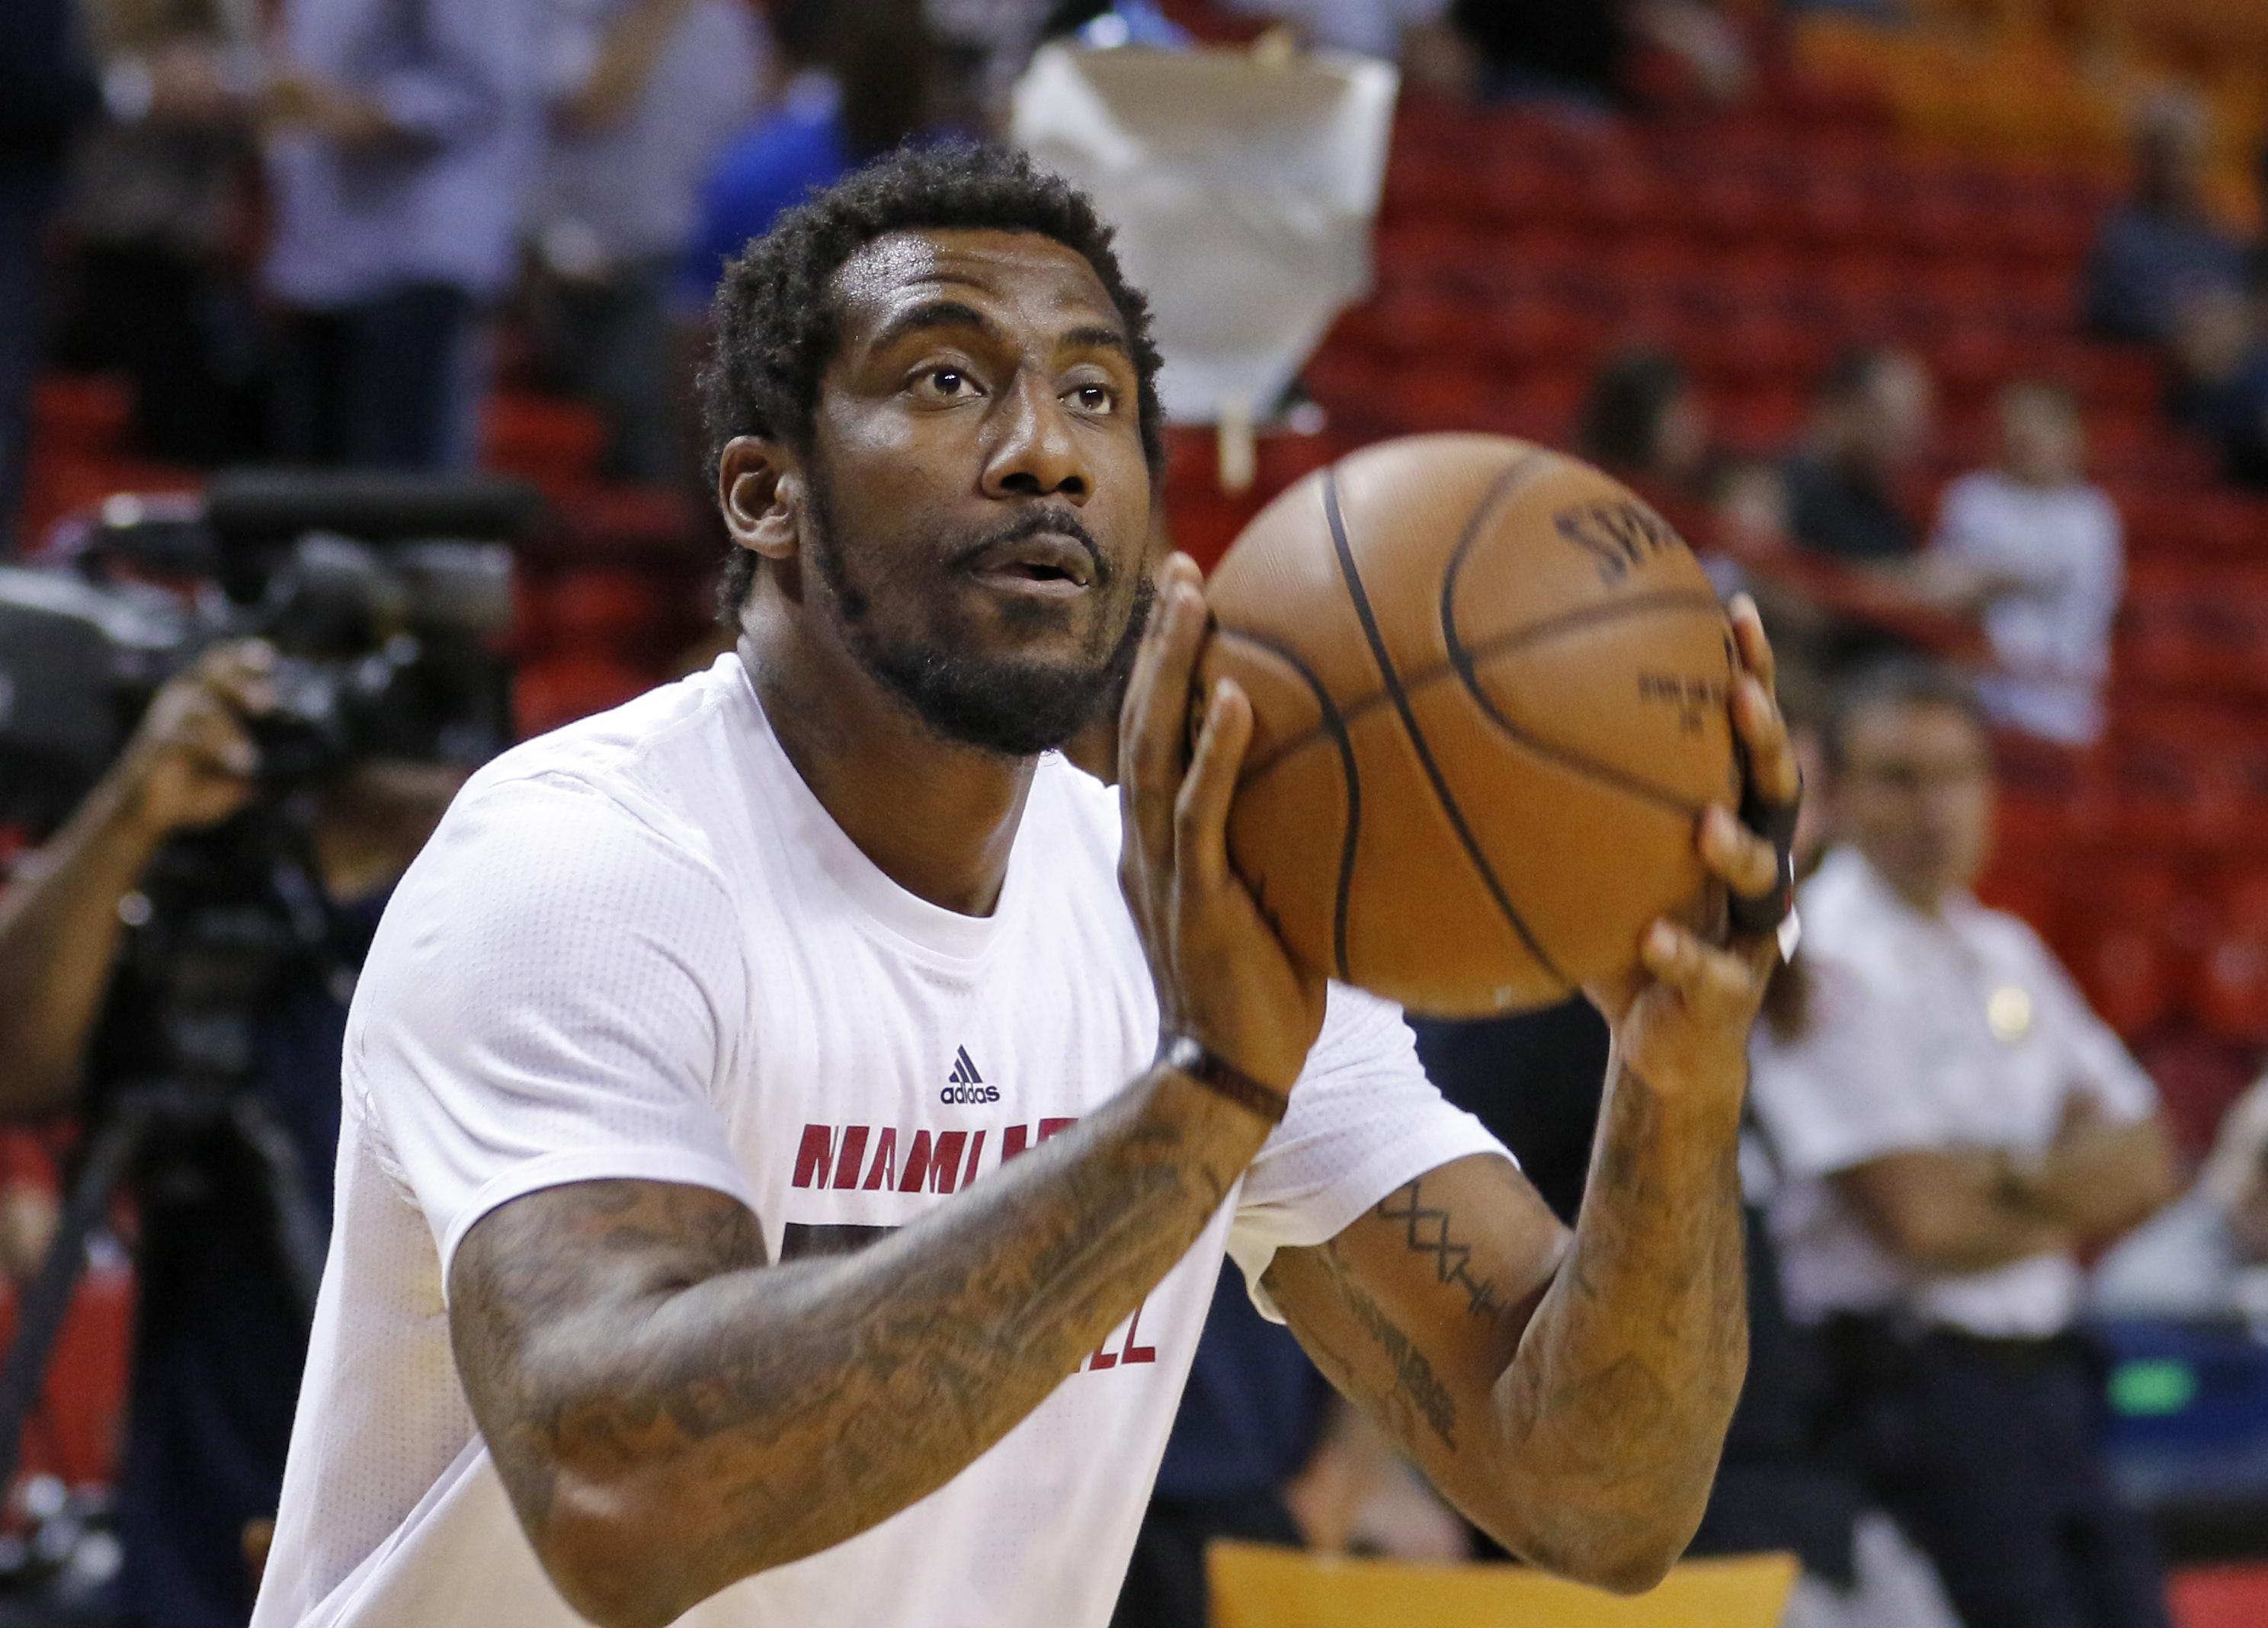 Amar'e Stoudemire denies punching his daughter / News 